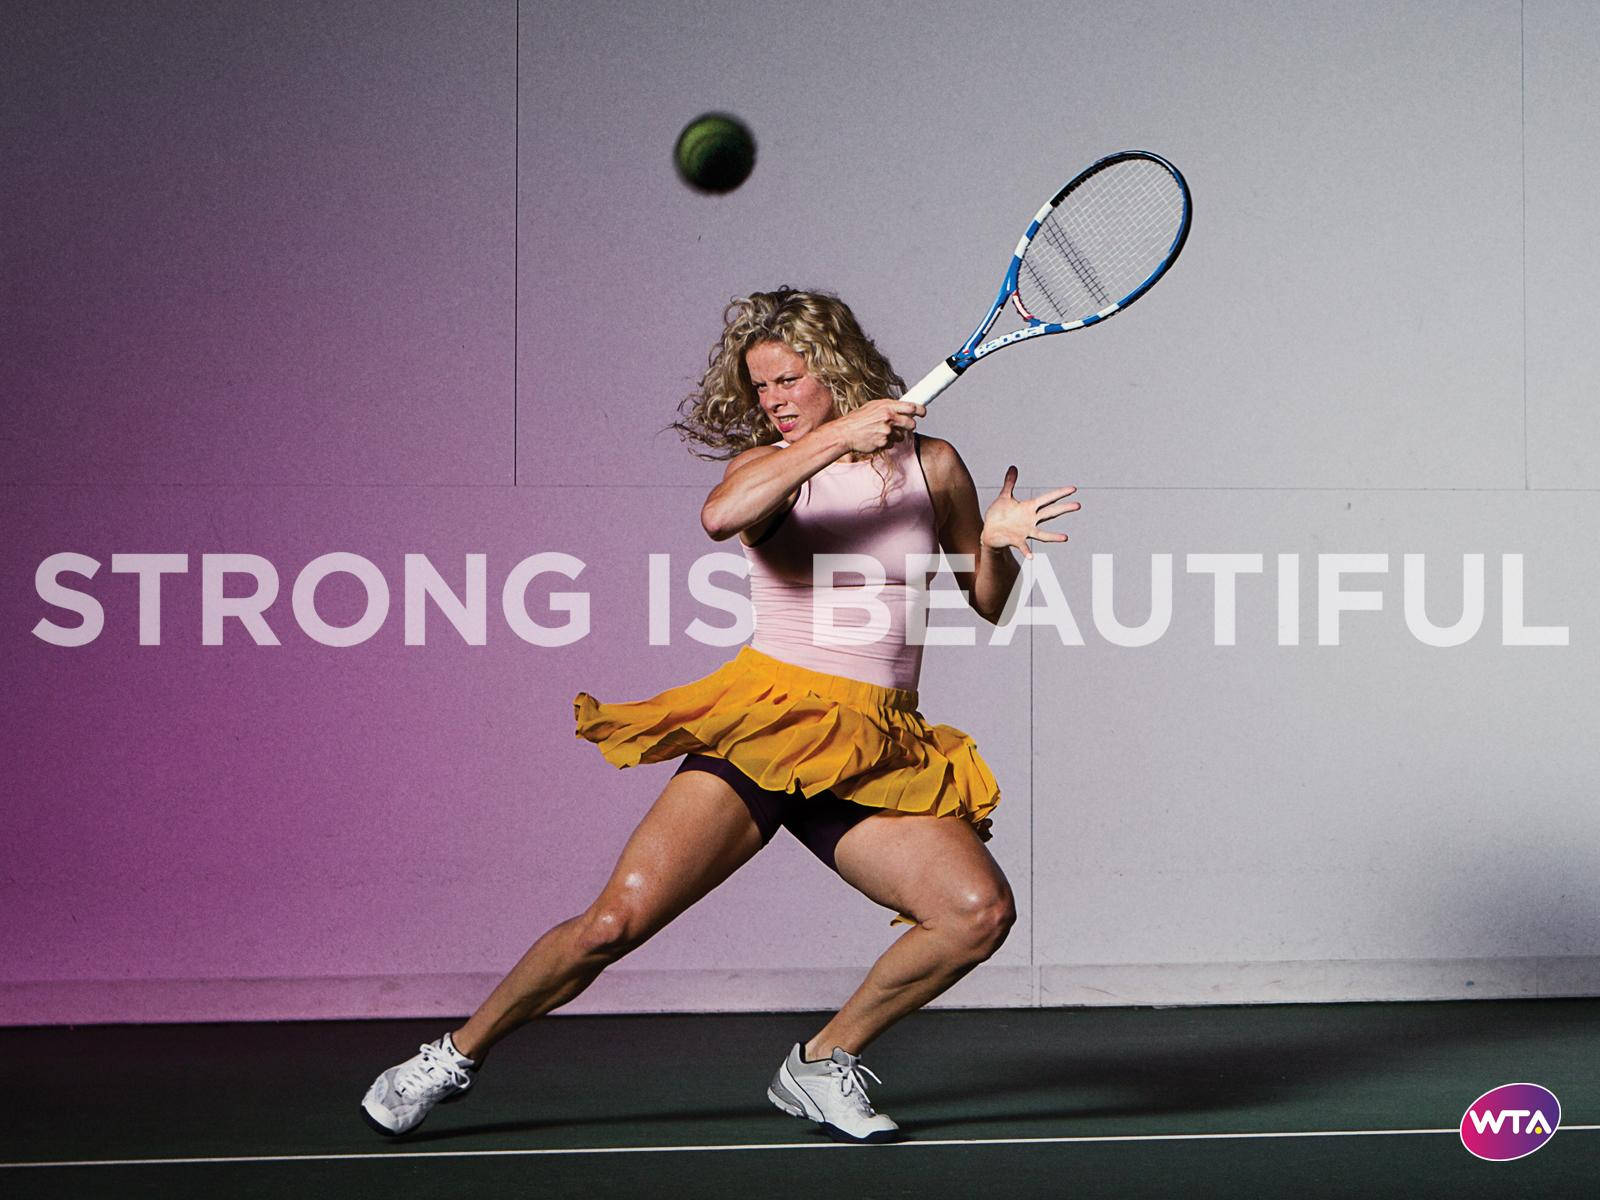 Kim Clijsters Demonstrating Strength on The Tennis Court Wallpaper